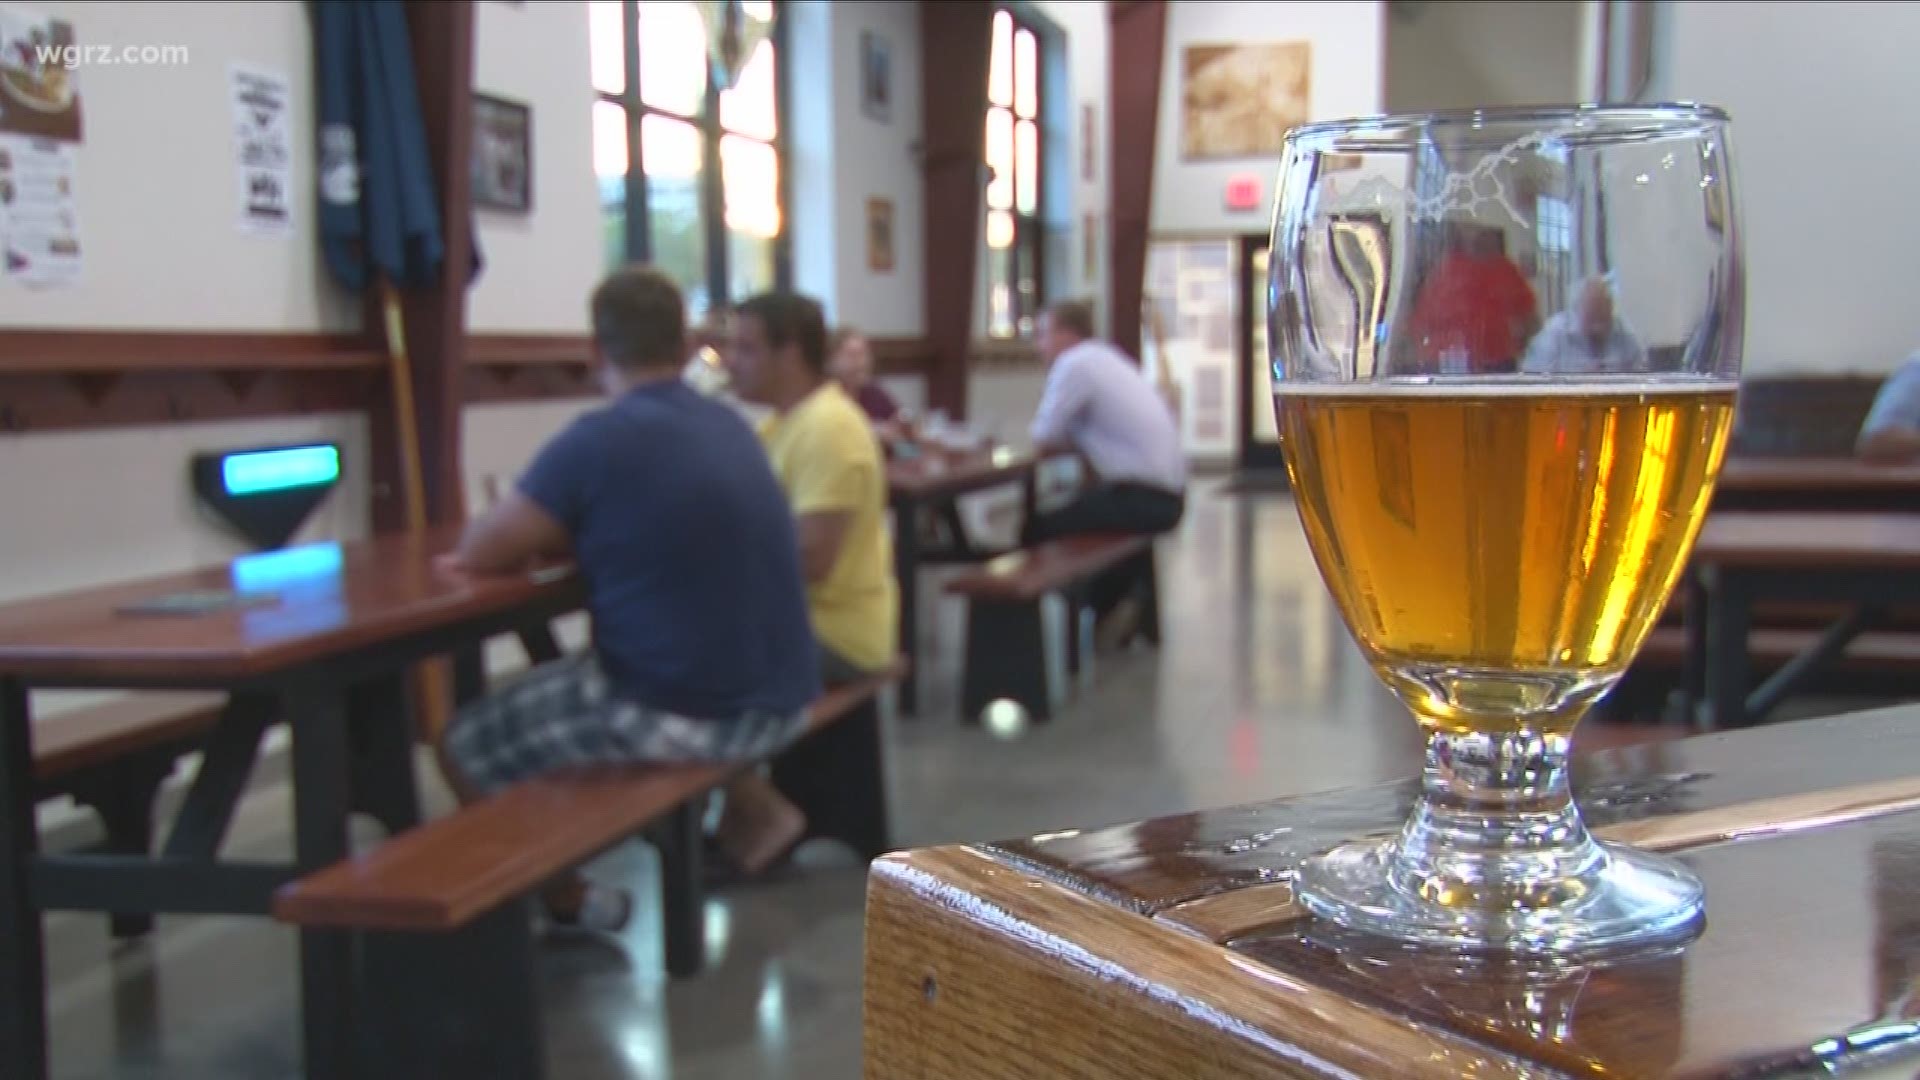 More than 400 breweries in New York State, with many in Buffalo, make up a $5 Billion industry.